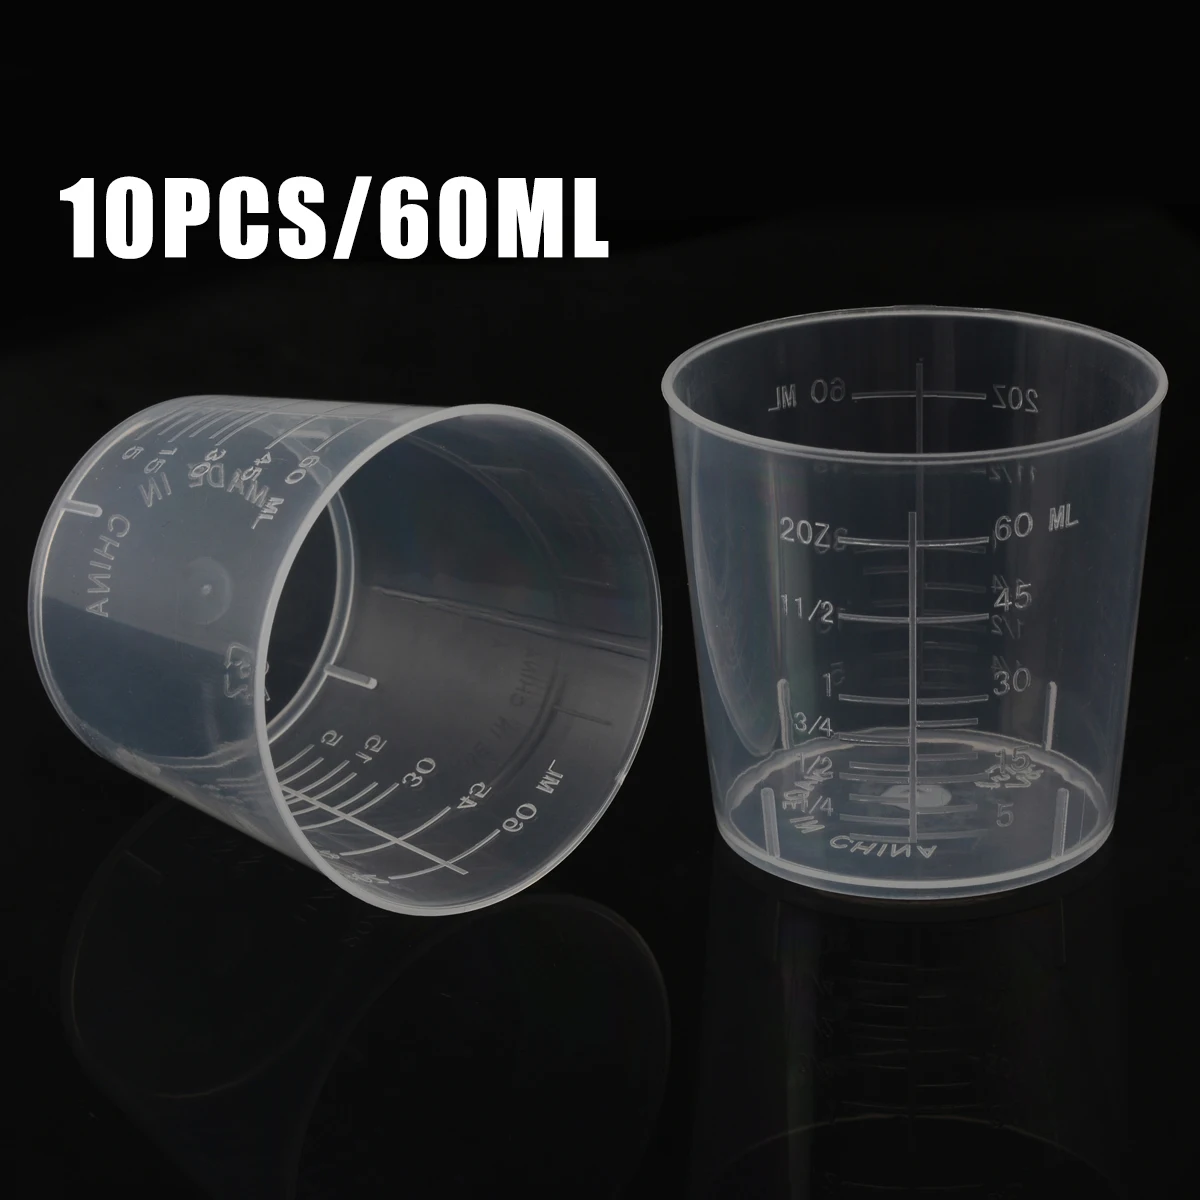 10pcs 60mL Clear Plastic Measuring Cup with Scale Surface Liquid Container Graduated Beaker Household Kitchen Cooking Tool - купить по